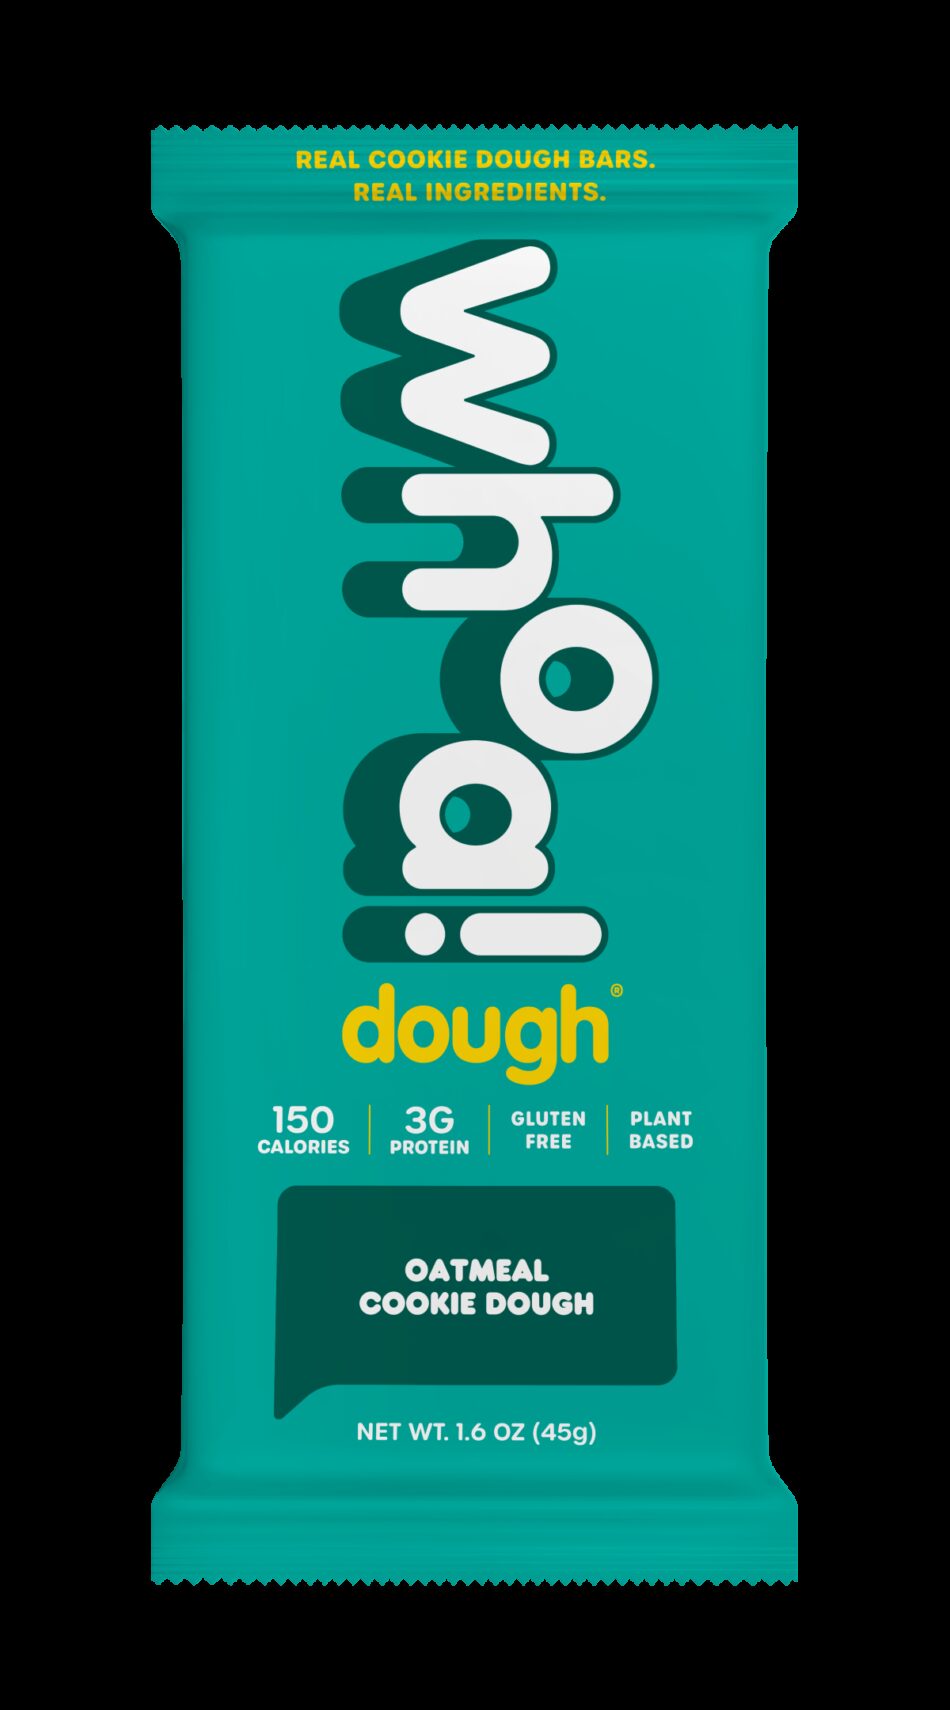 Whoa Dough Debuts New ‘Oatmeal Cookie Dough’ Flavor At Expo West